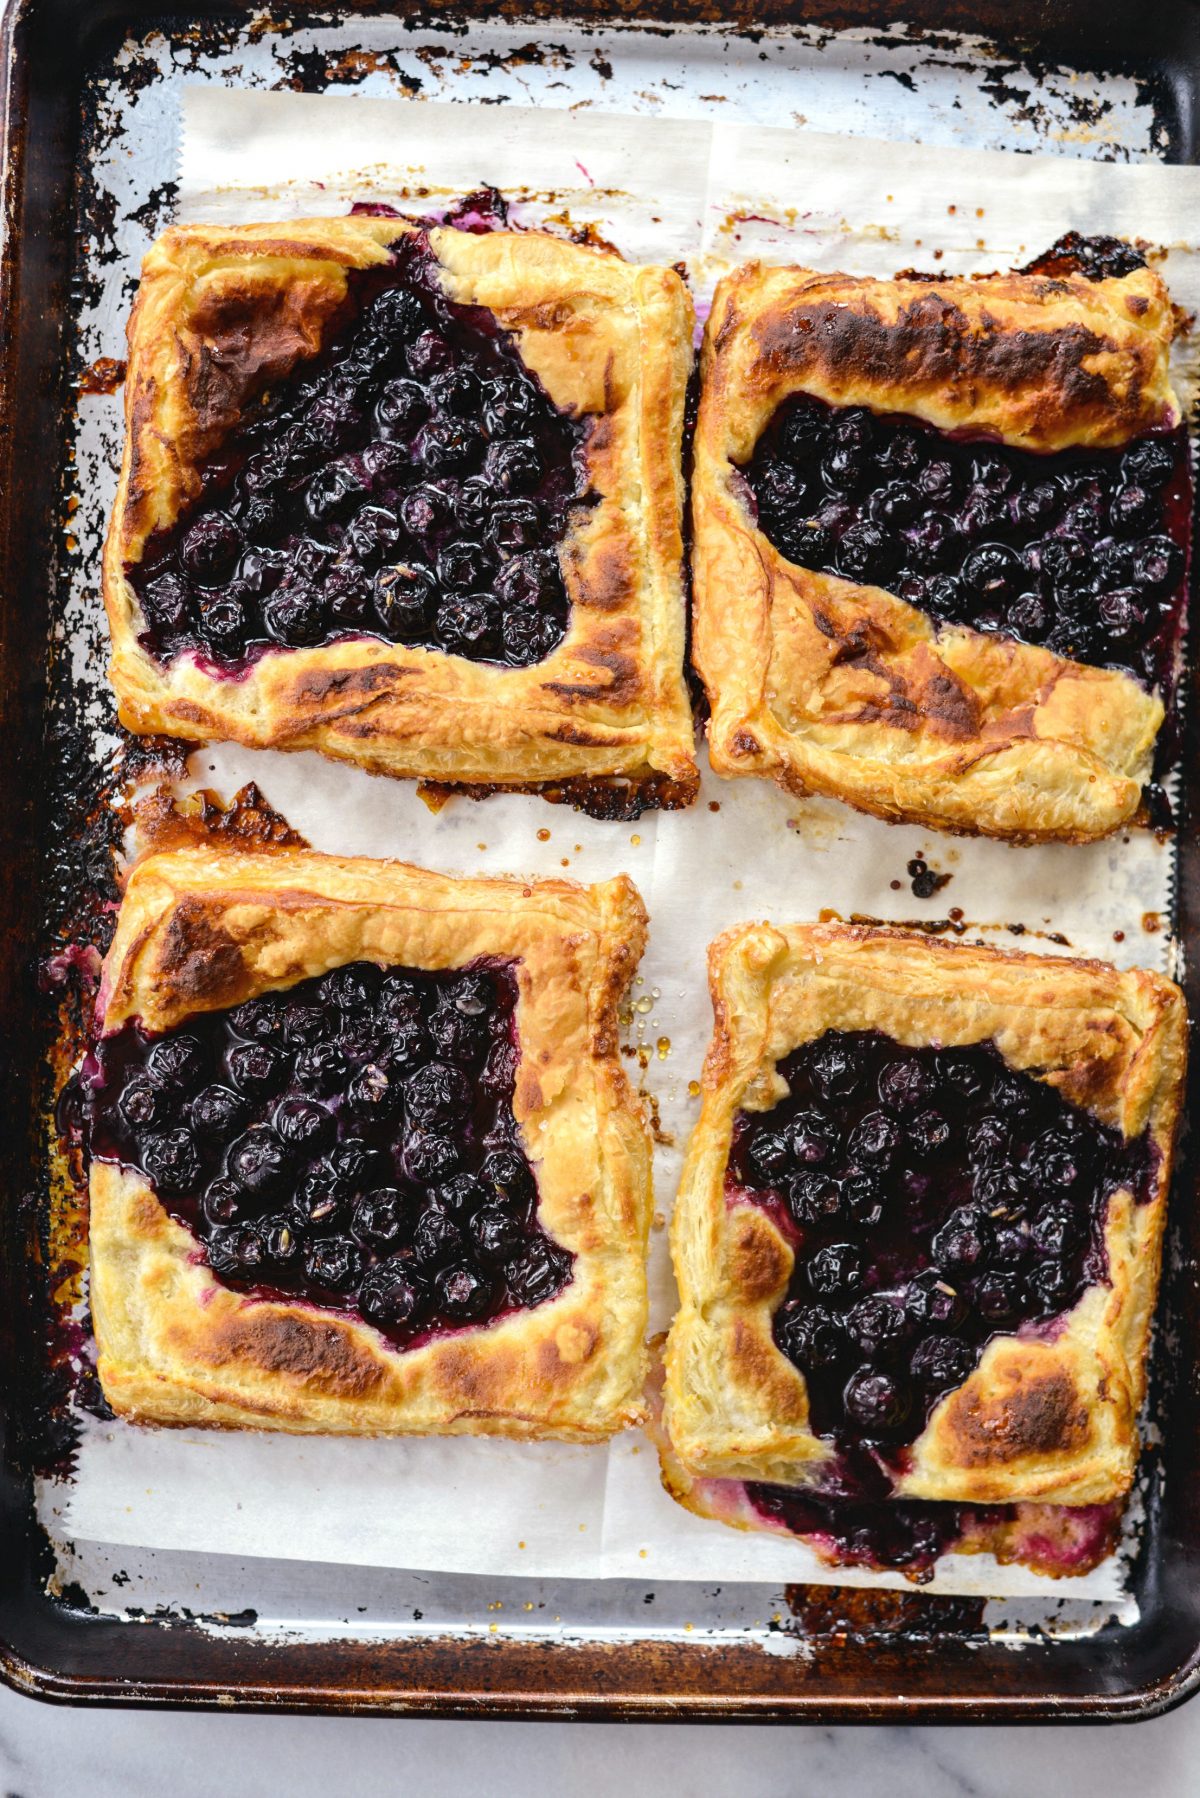 baked and golden brown Blueberry Lavender Pastry Pies